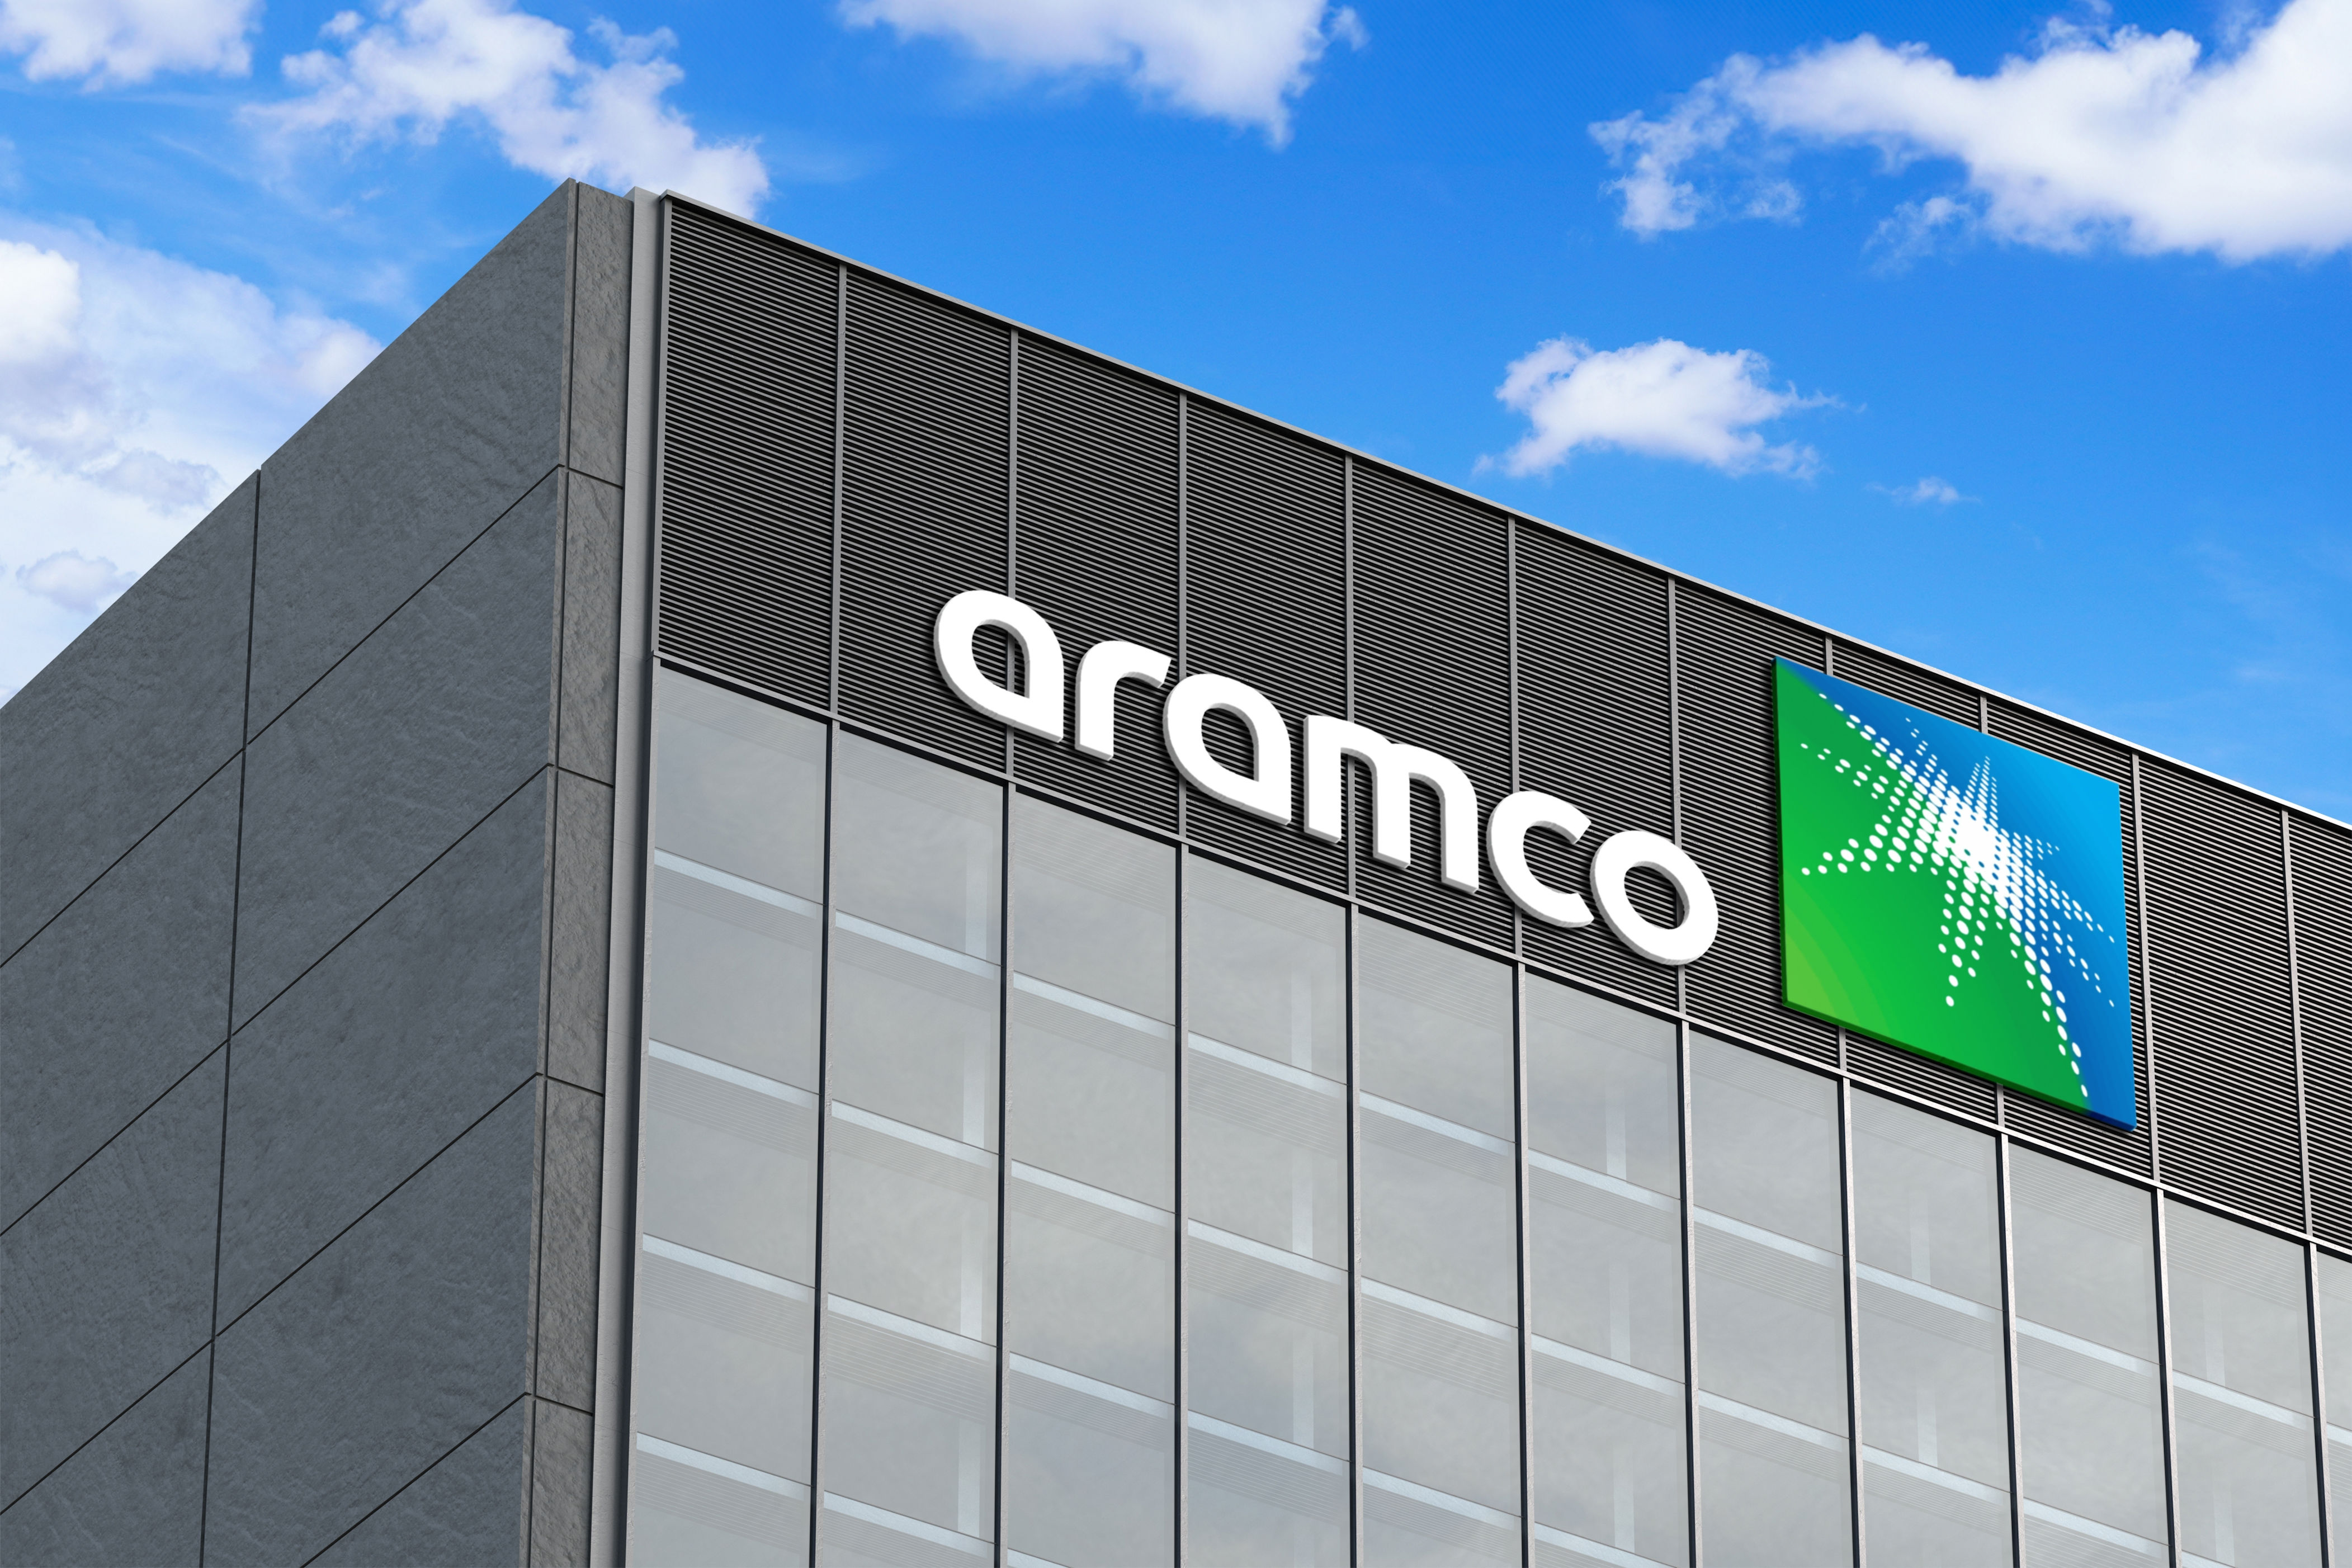 saudi aramco posts 14% revenue drop, still aims to pay $124.3b in dividends